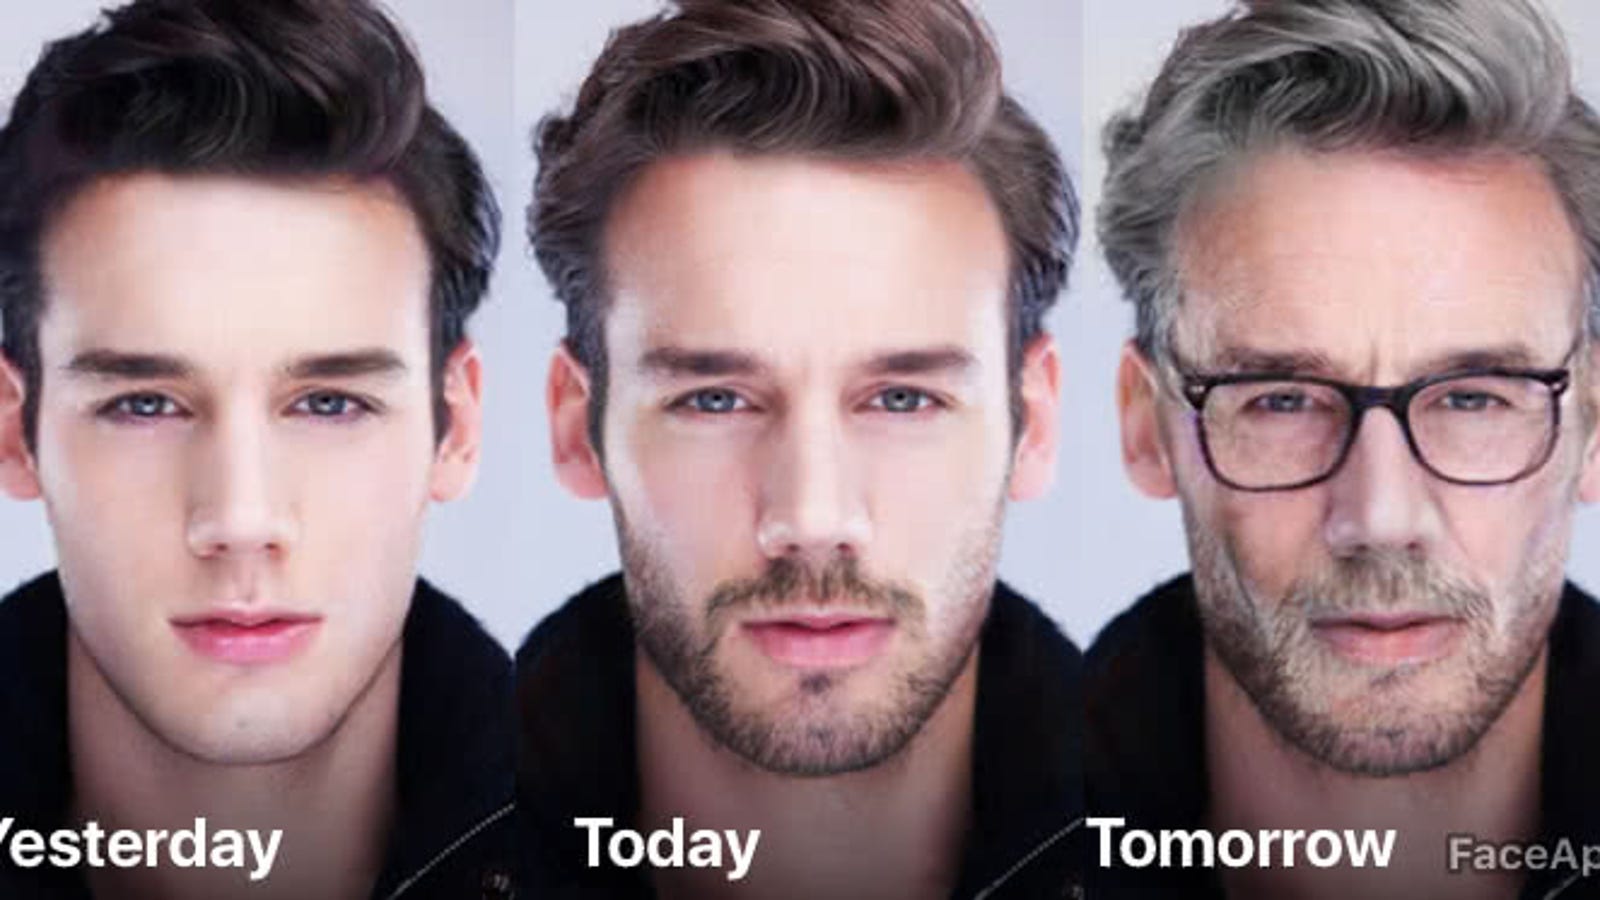 after face on onion and before Society, But Probably the Won't Destroy FaceApp Privacy